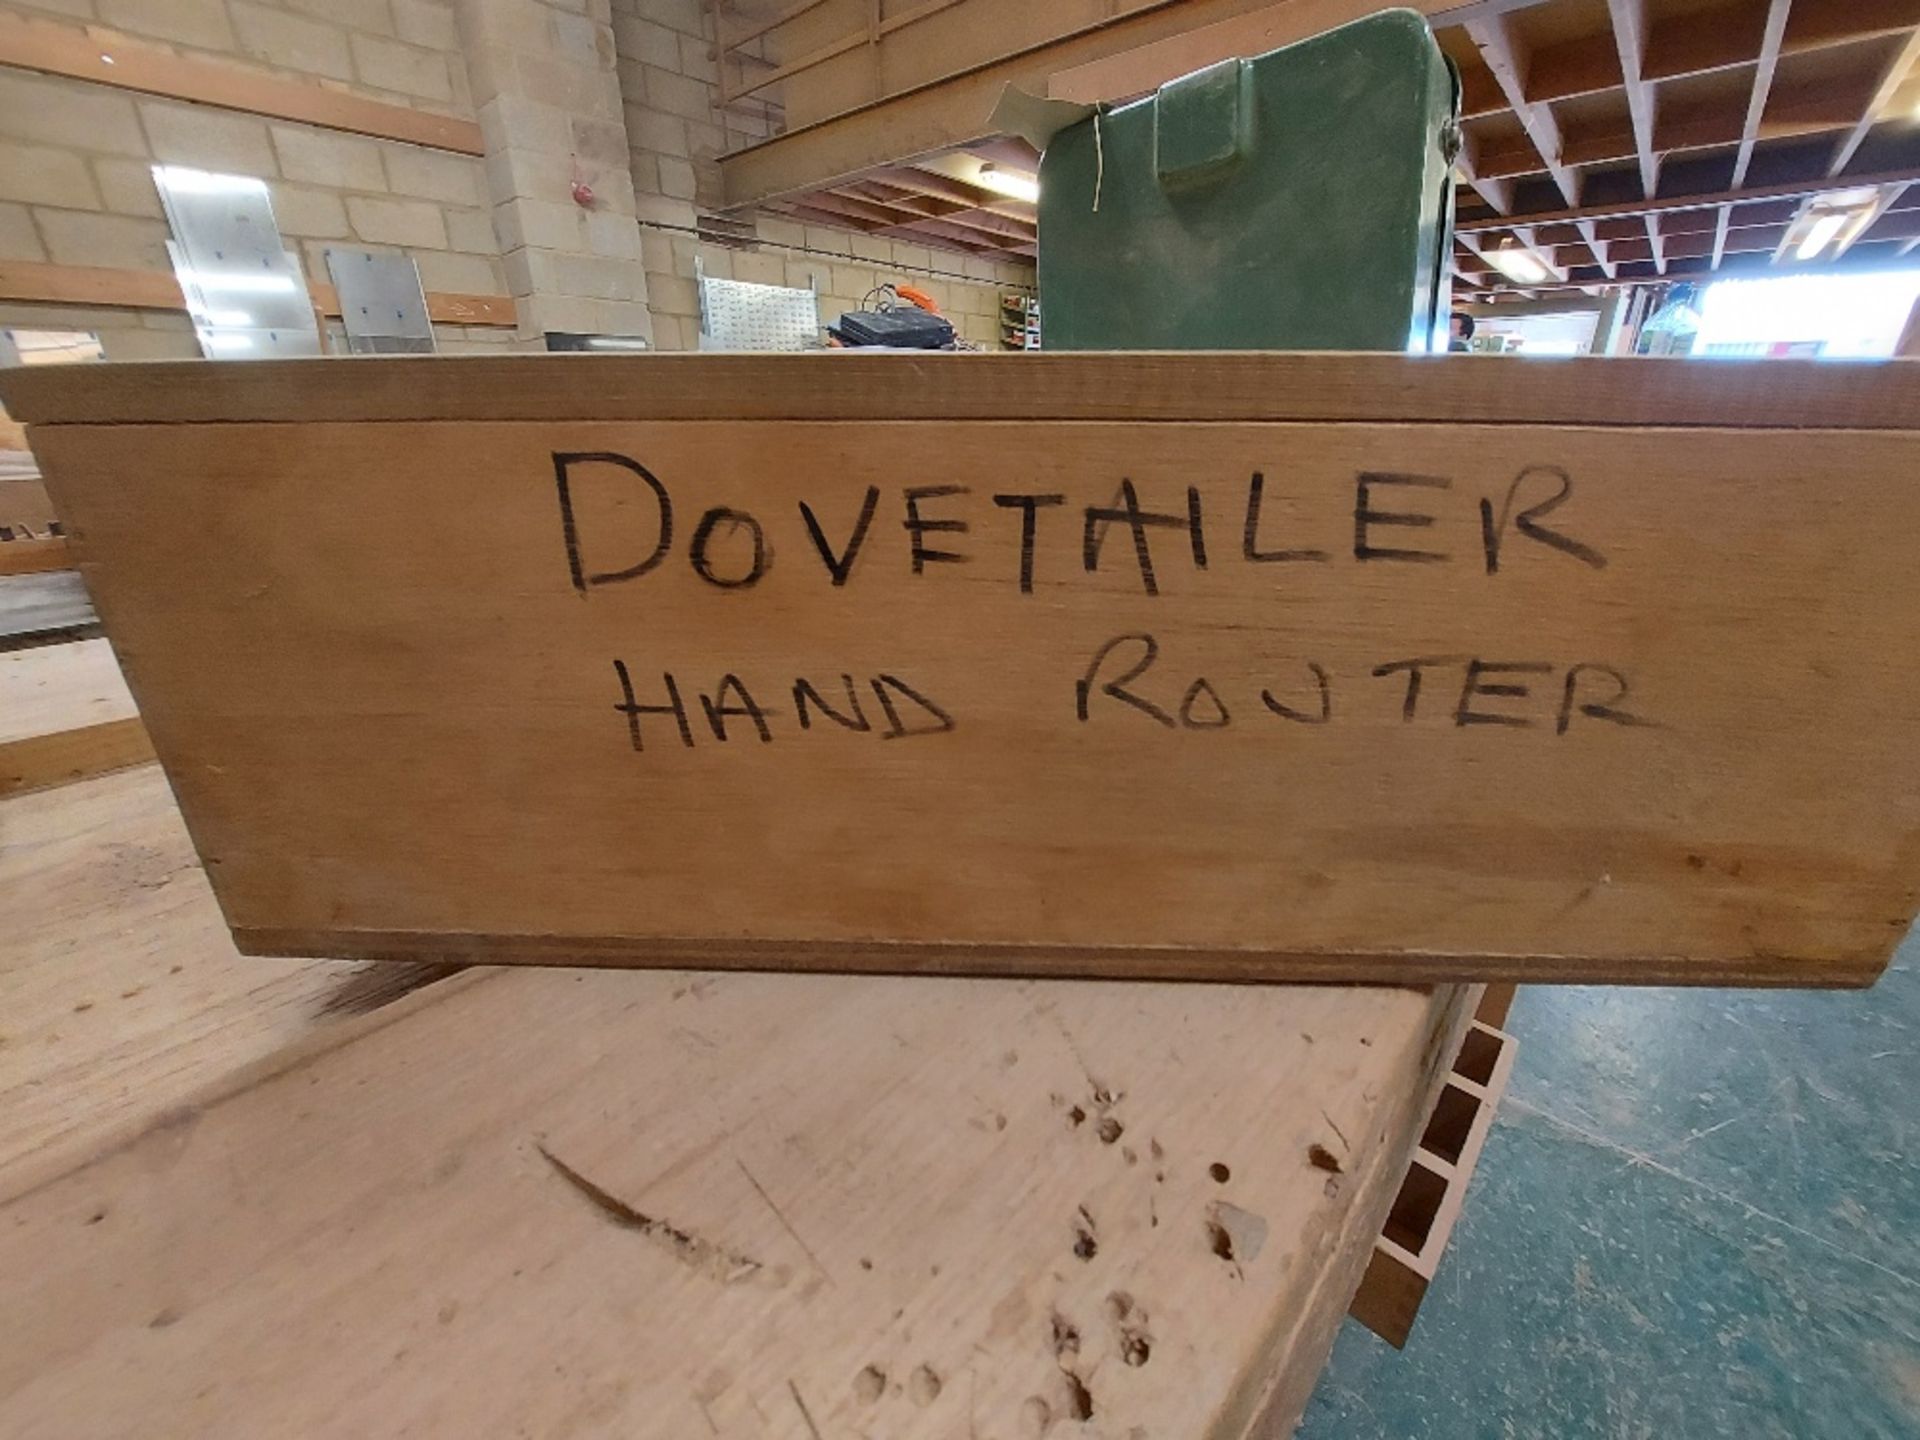 Dovetail Router Jig - Image 2 of 2